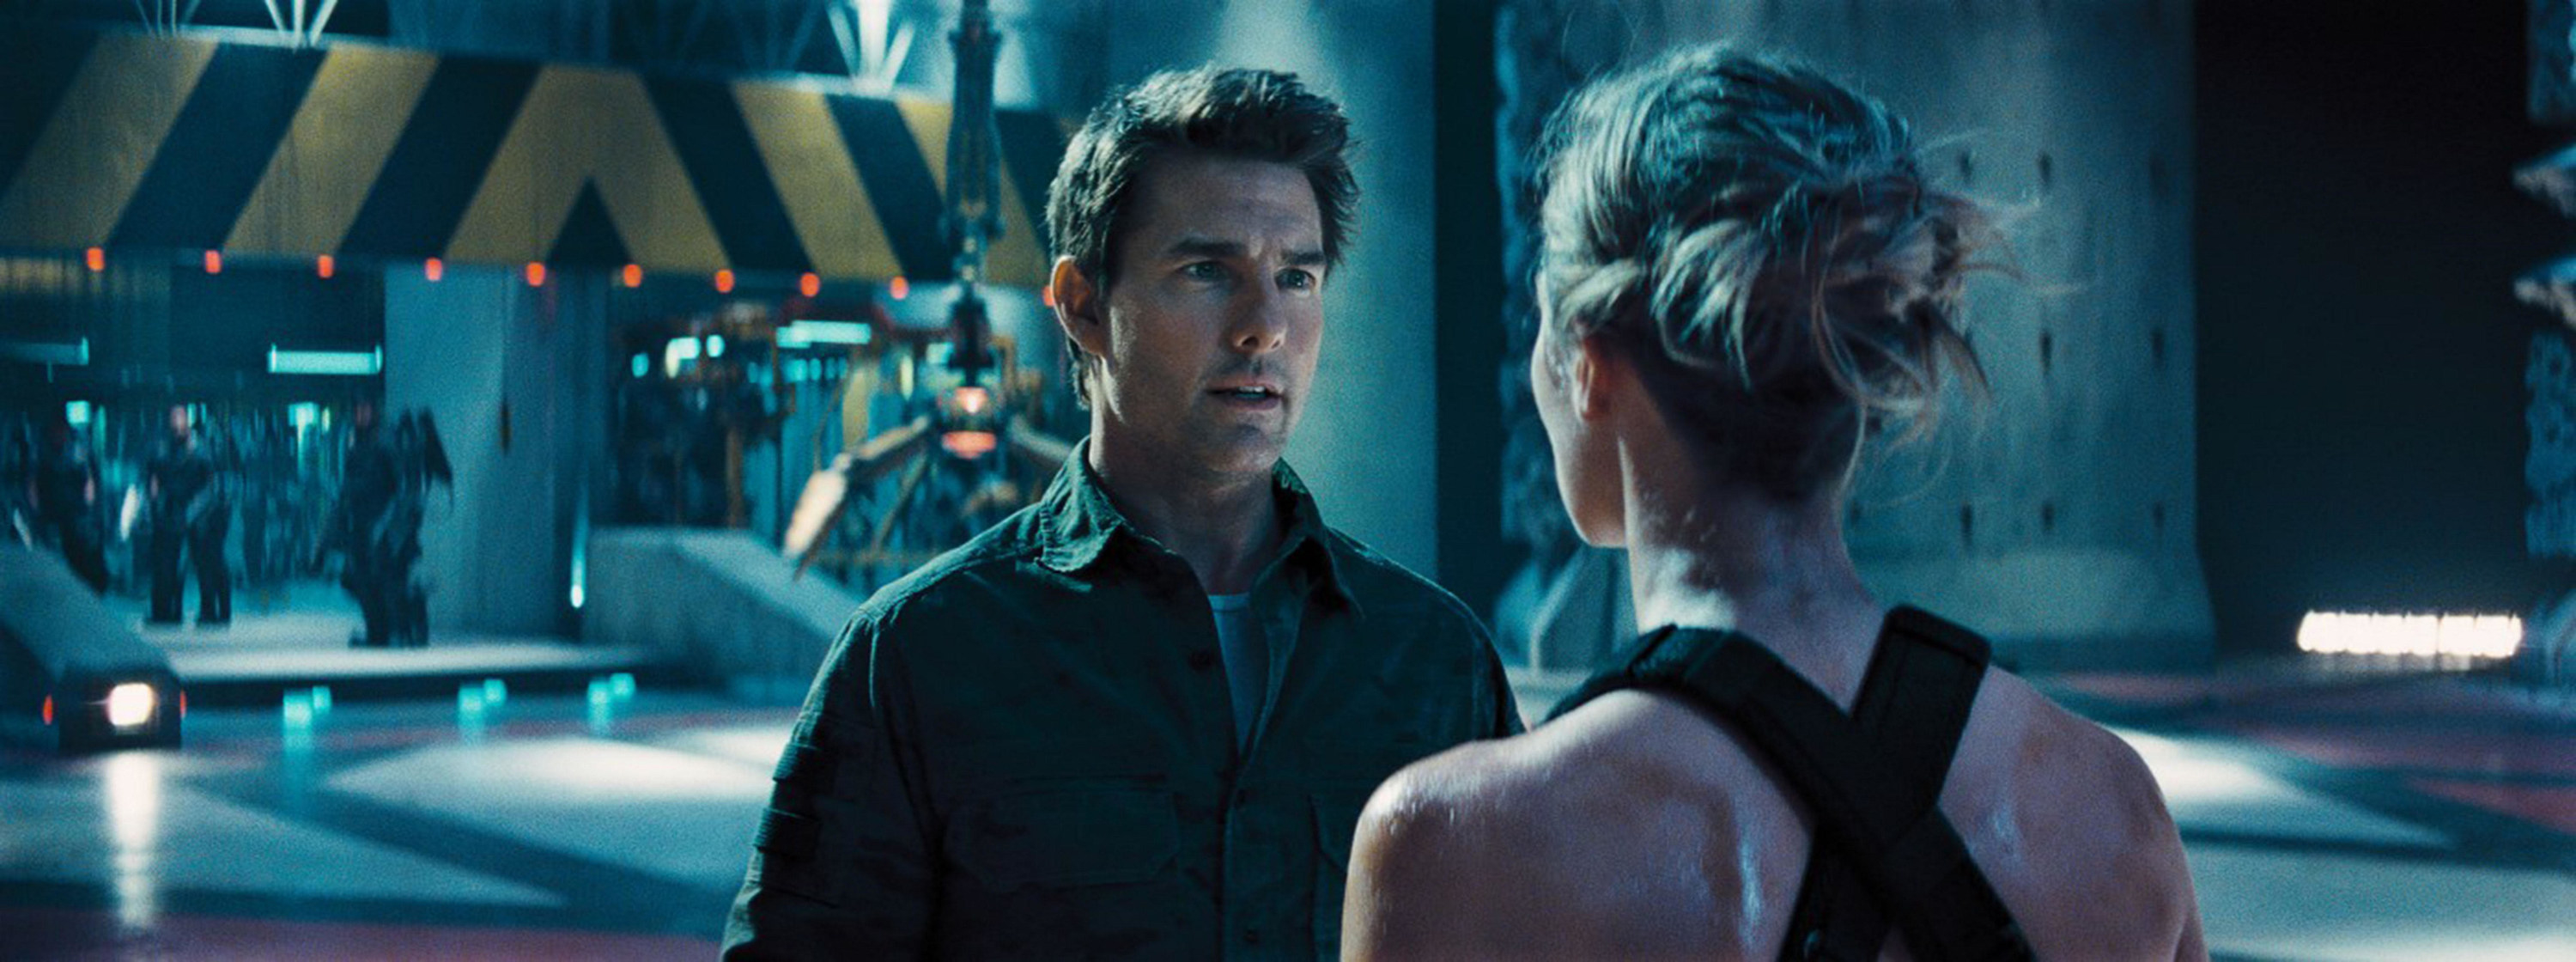 Tom Cruise in a button-up shirt talks to Emily Blunt in a futuristic training facility